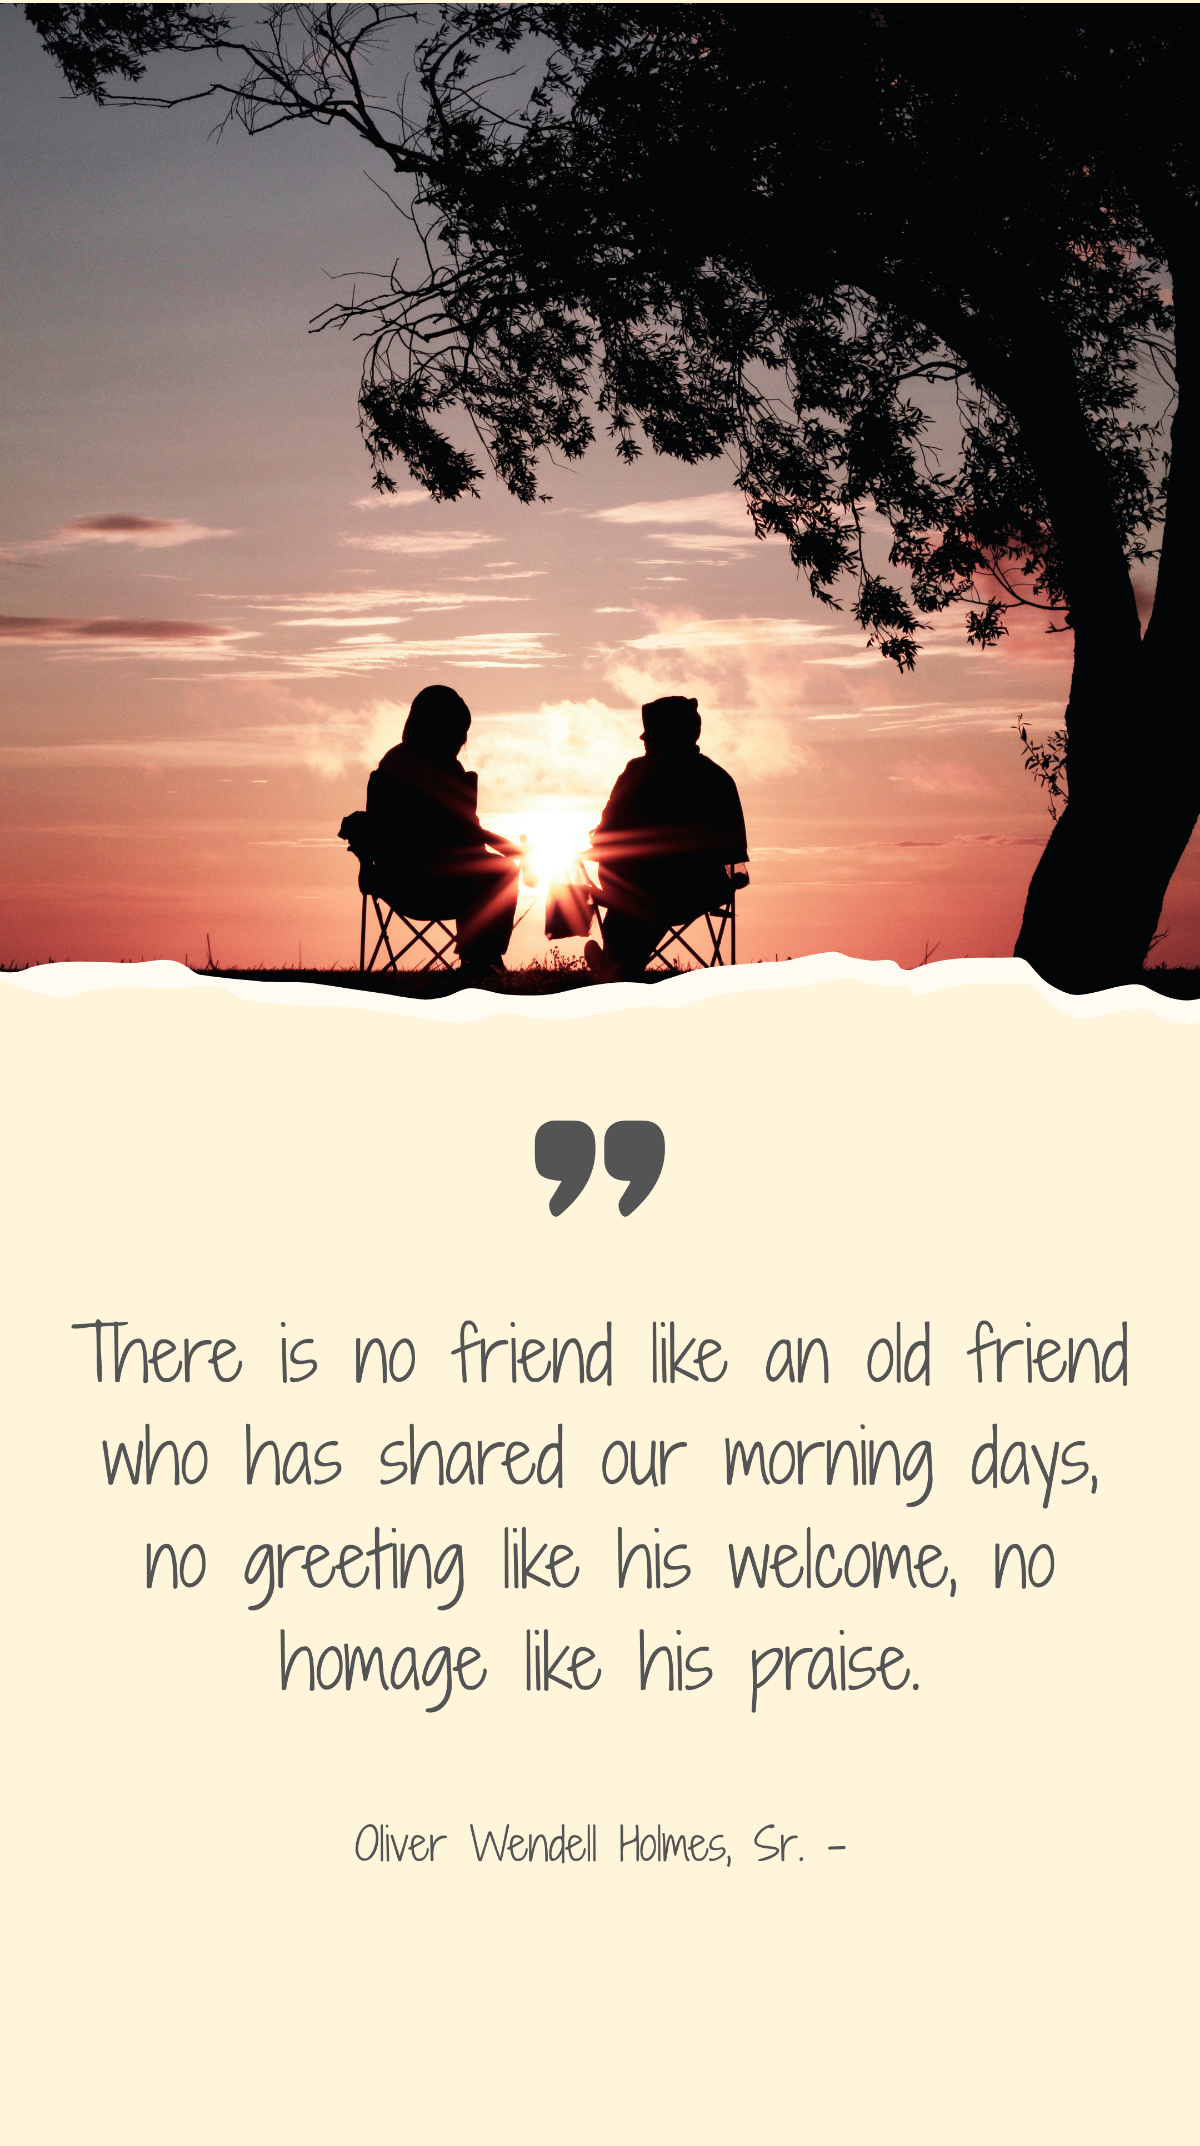 Oliver Wendell Holmes, Sr. - There is no friend like an old friend who has shared our morning days, no greeting like his welcome, no homage like his praise. Template